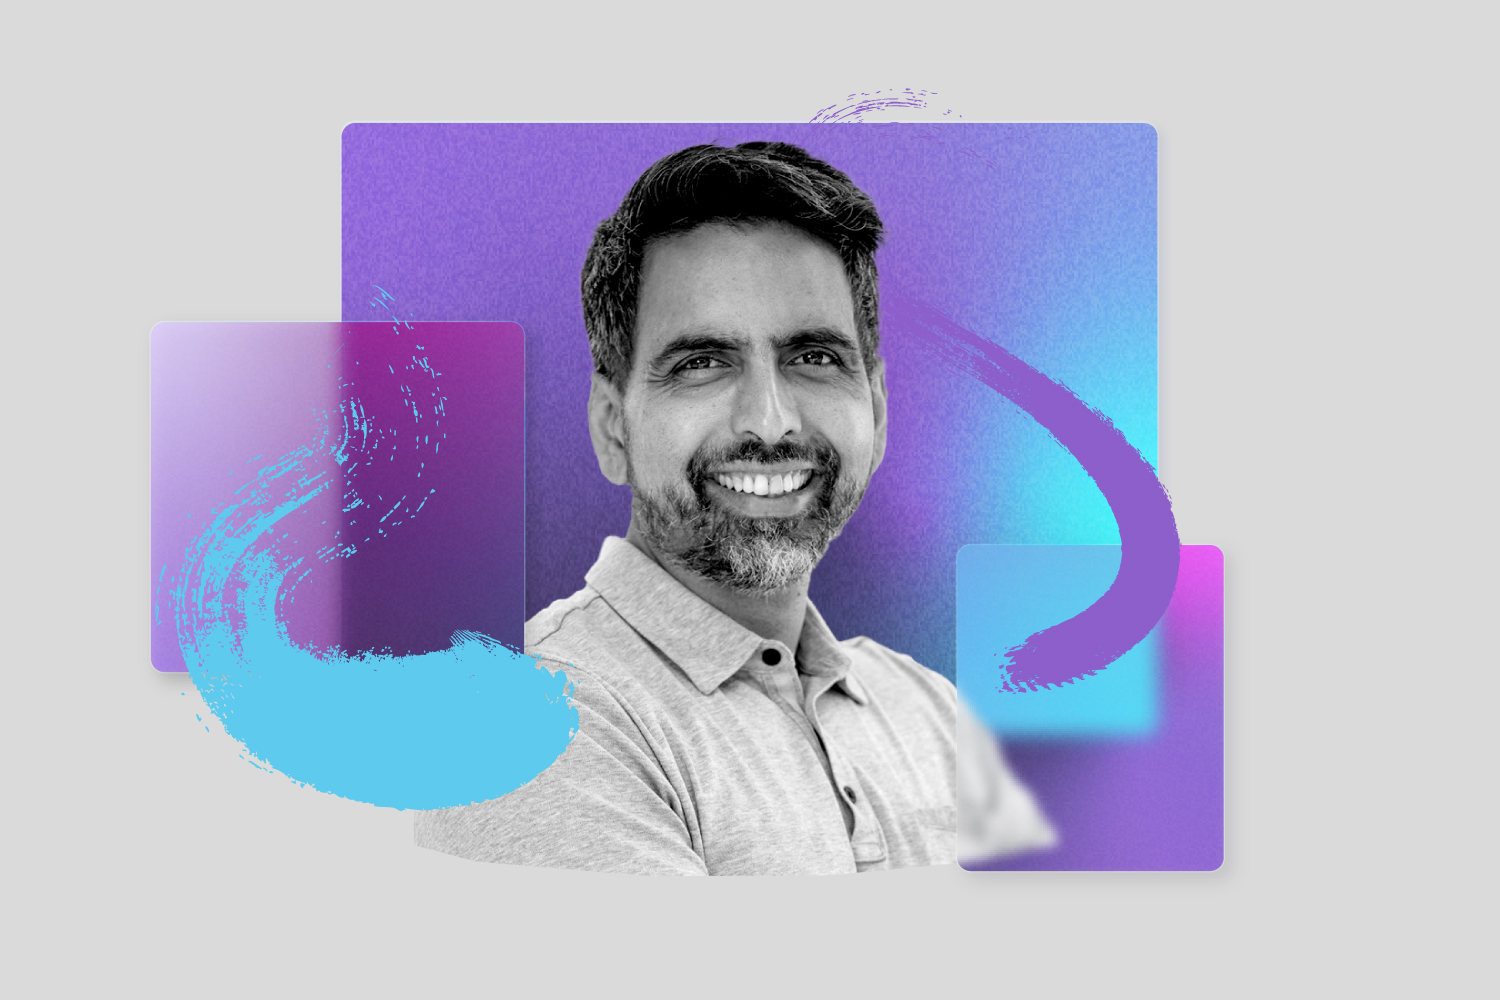 A colorful photo-illustration of Sal Khan, founder of the Khan Academy and author of the newly released book Brave New Words: How AI Will Revolutionize Education (and Why That’s a Good Thing).